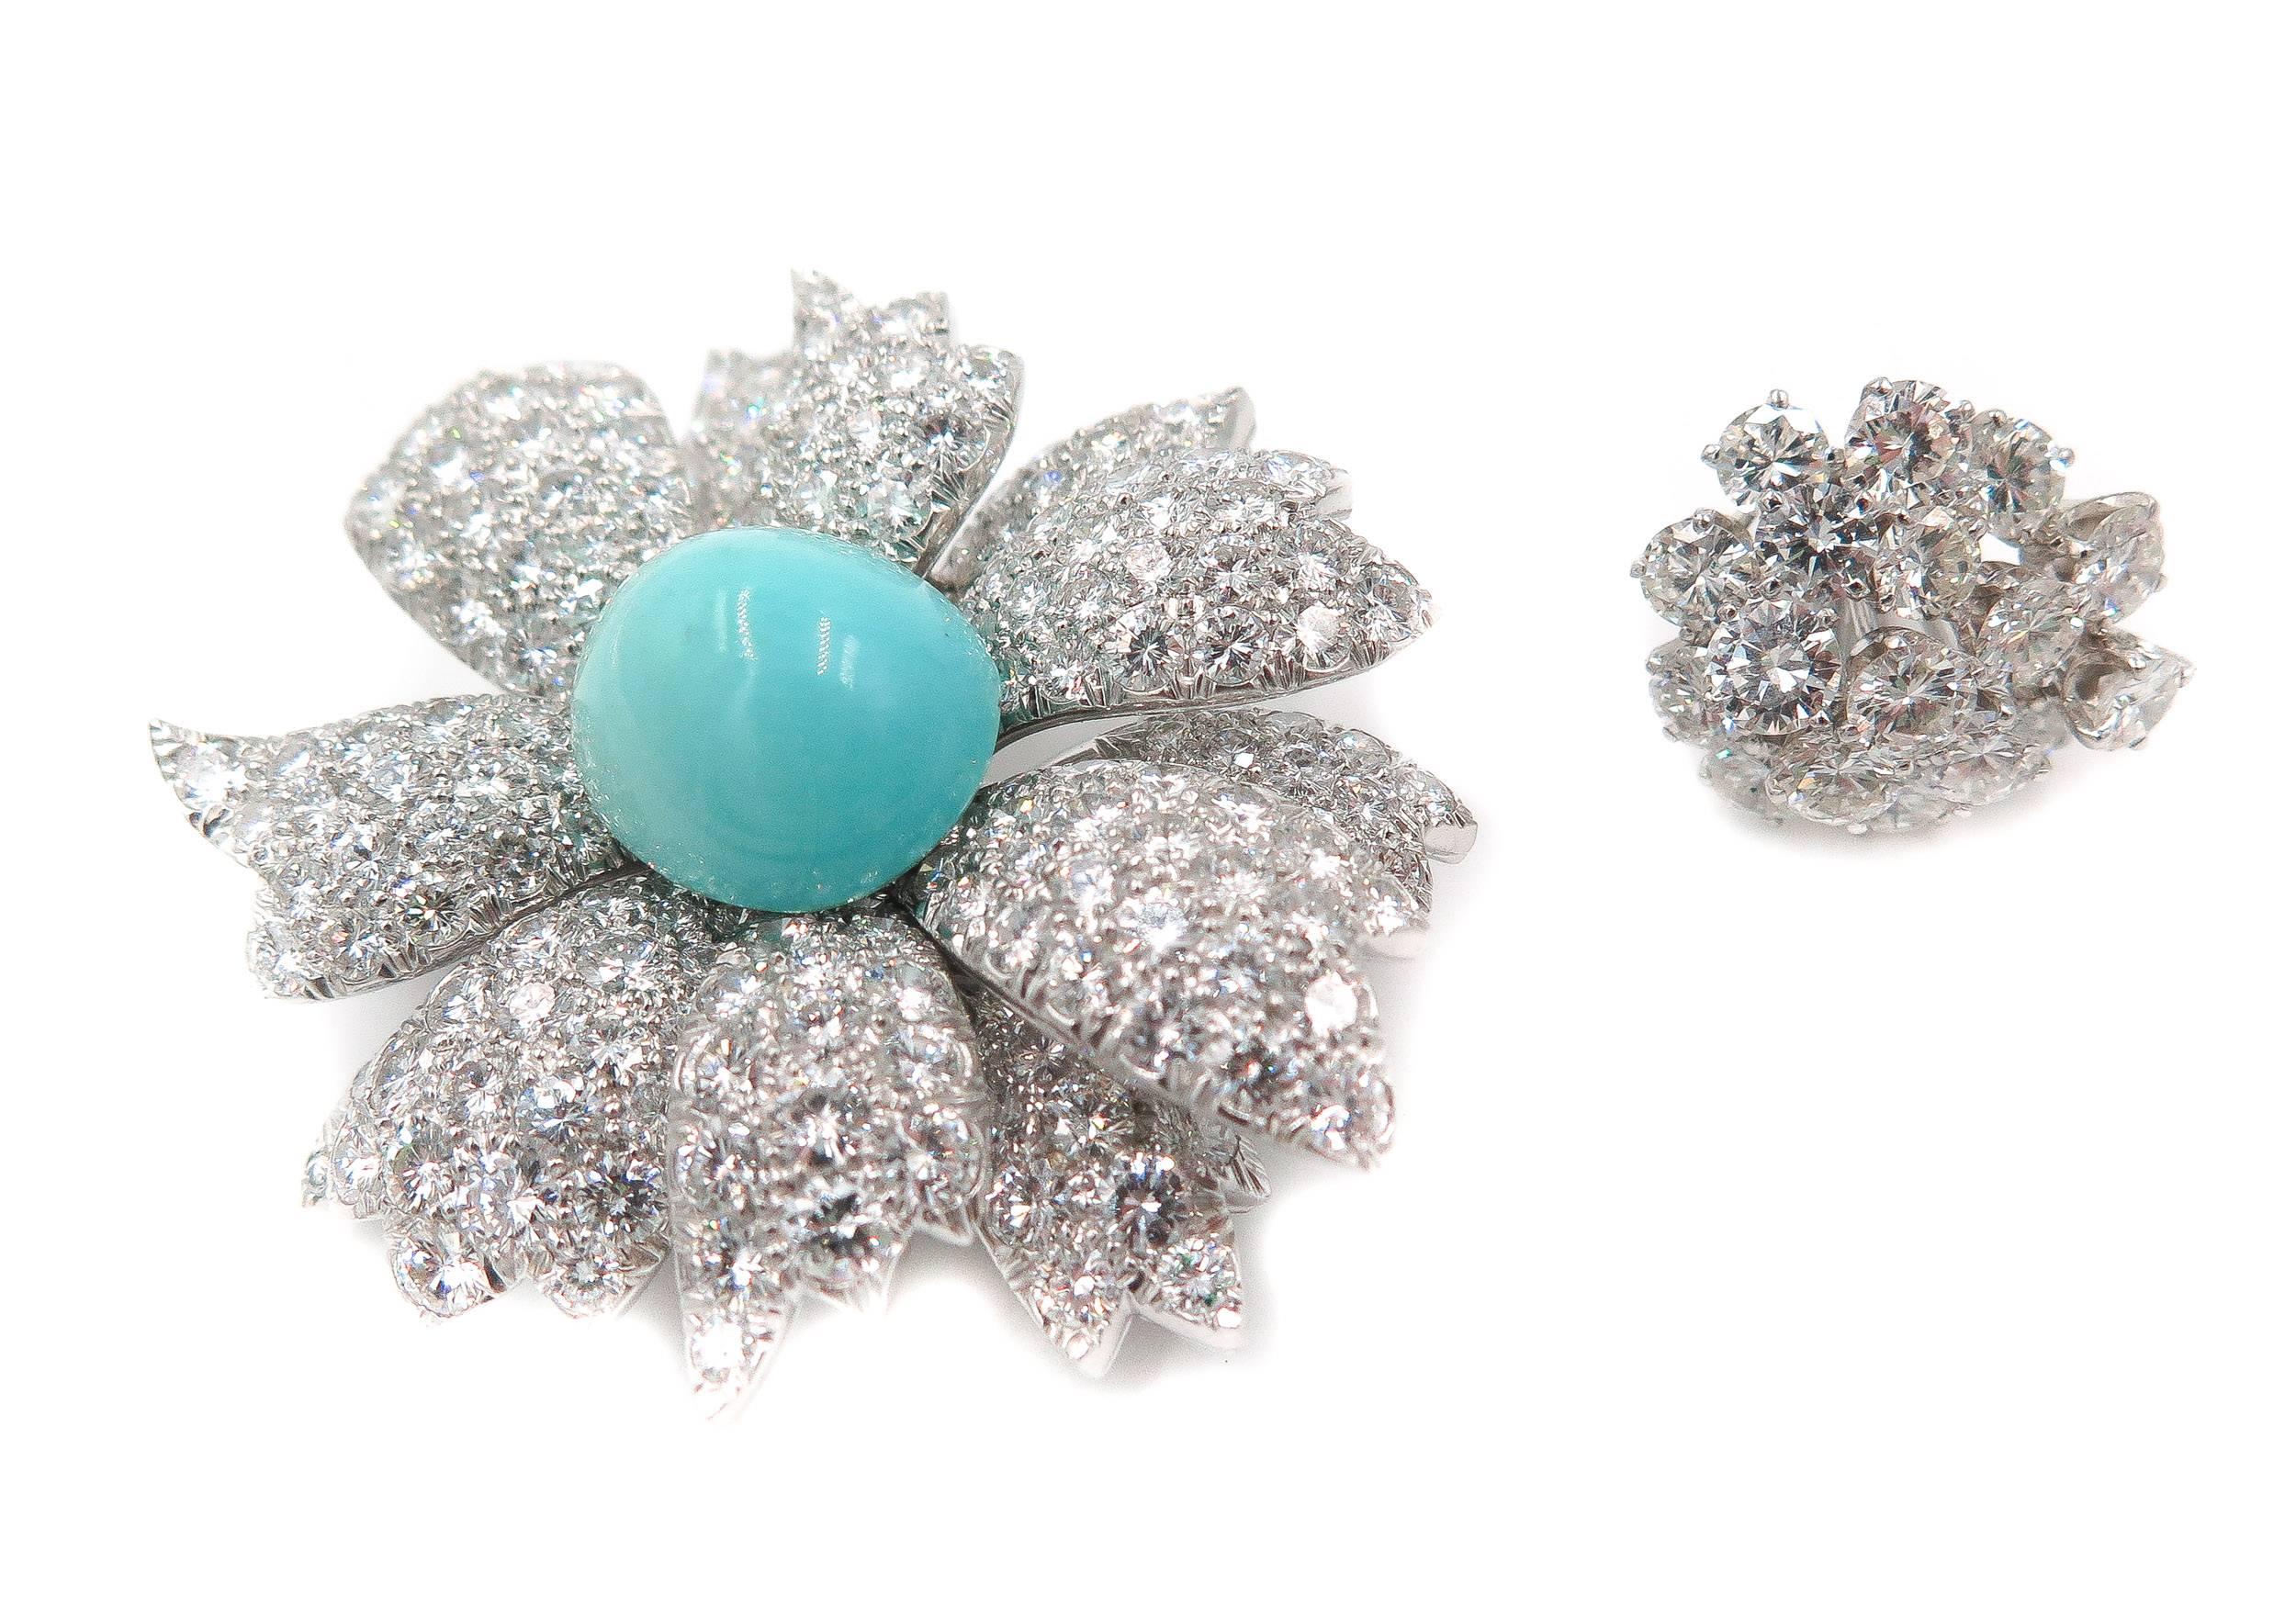 This stunning diamond and turquoise brooch is just the bauble to brighten up your wardrobe. 
With an interchangeable centerpiece, this brooch can go from diamond to turquoise in a quick twist! 
An impeccable cluster of diamonds make up this diamond